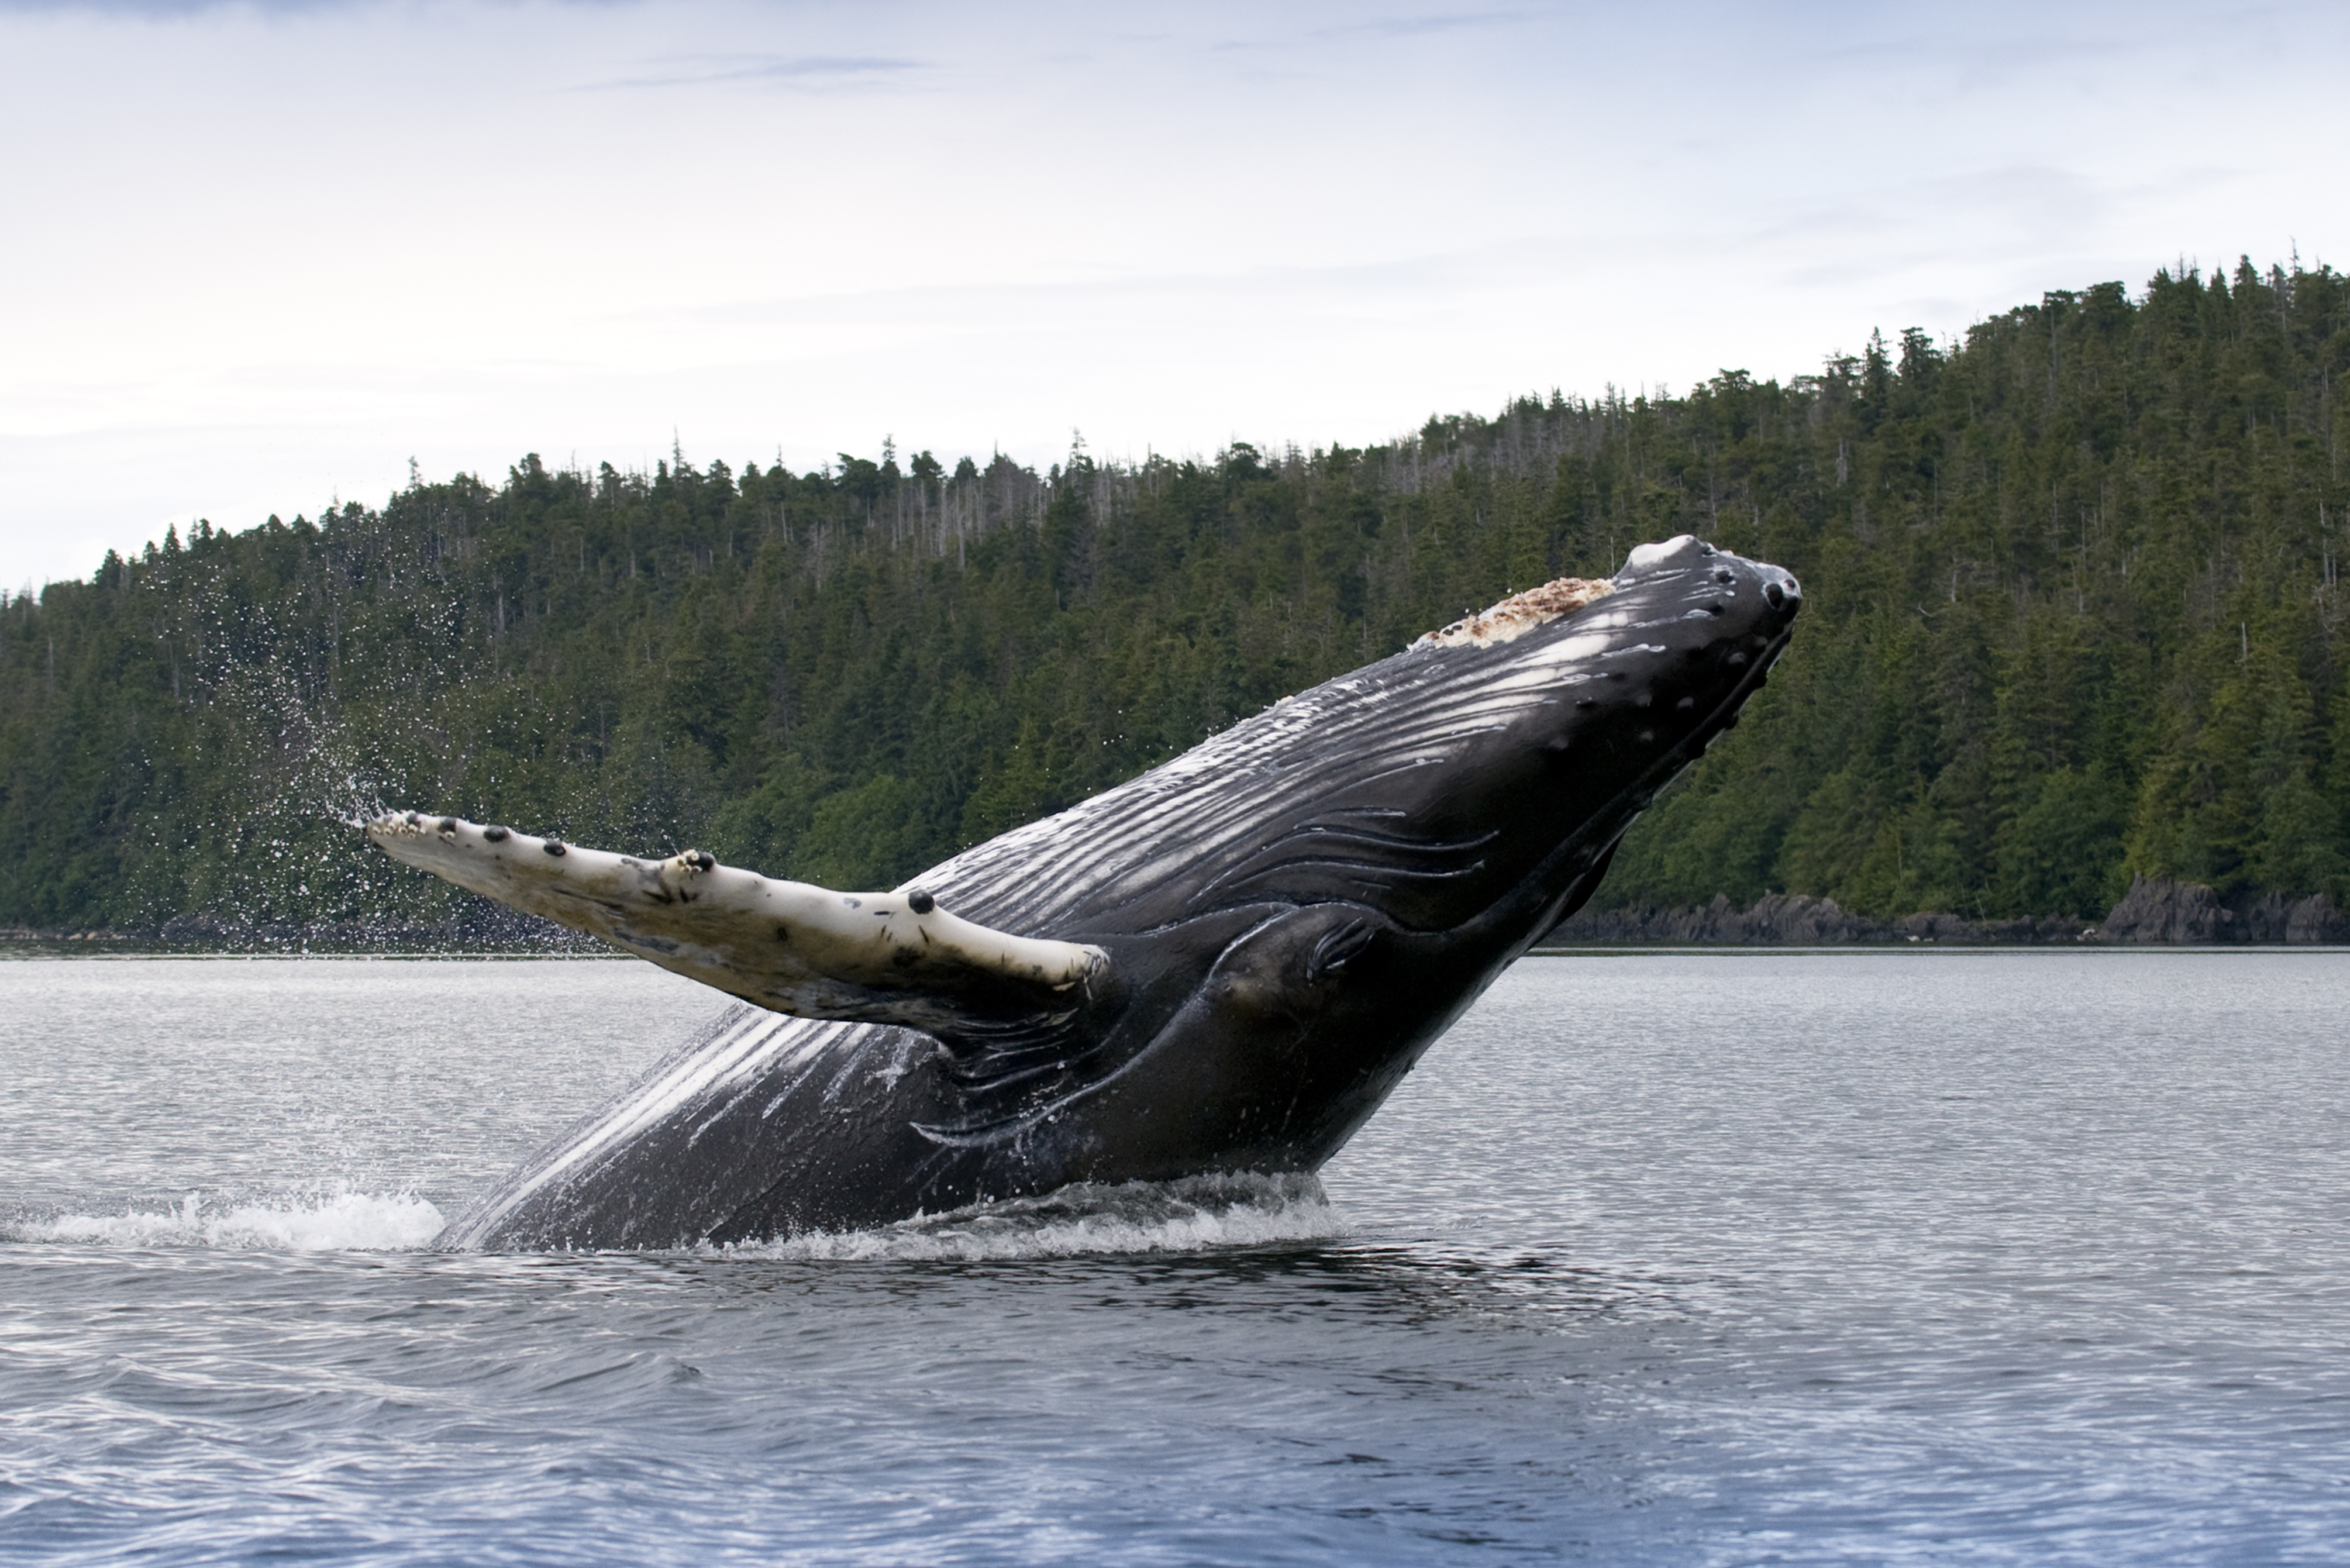 One humpback whale jumping out of the water